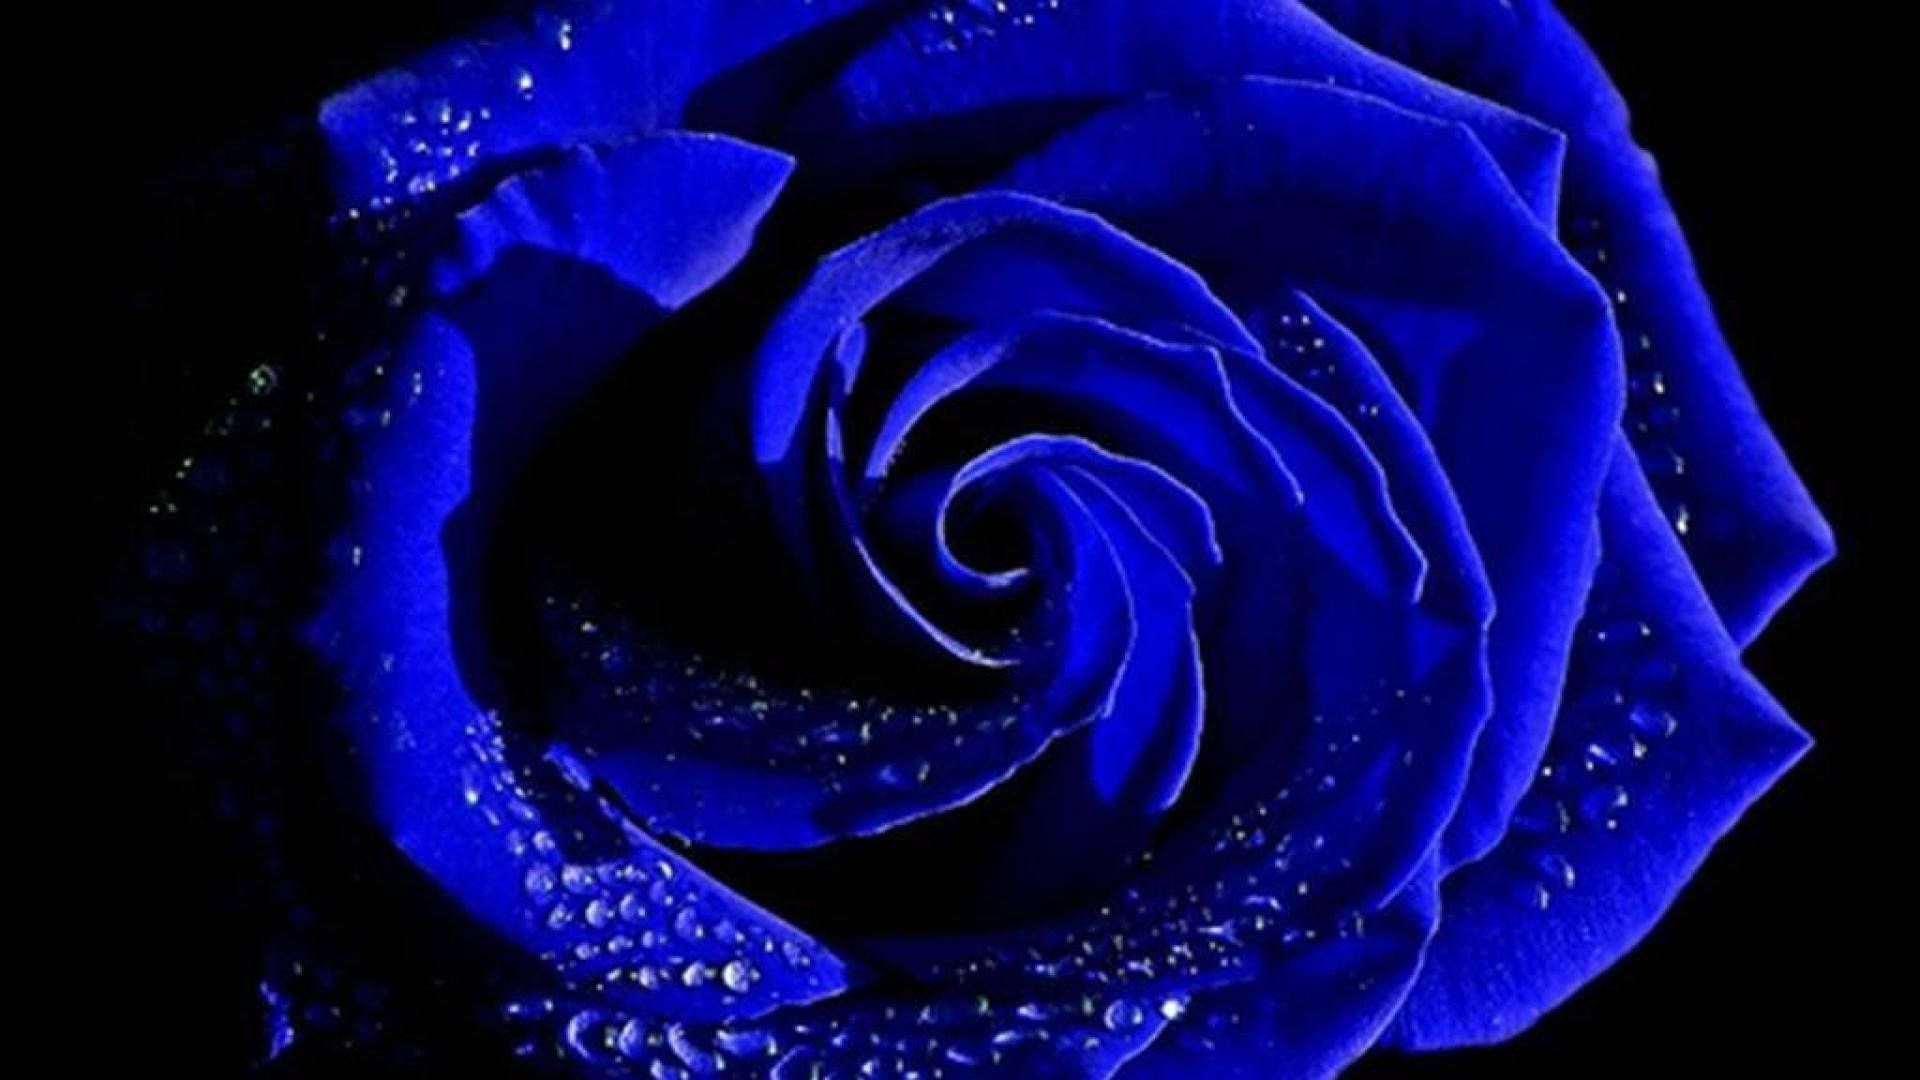 A blue rose with water droplets on it - Indigo